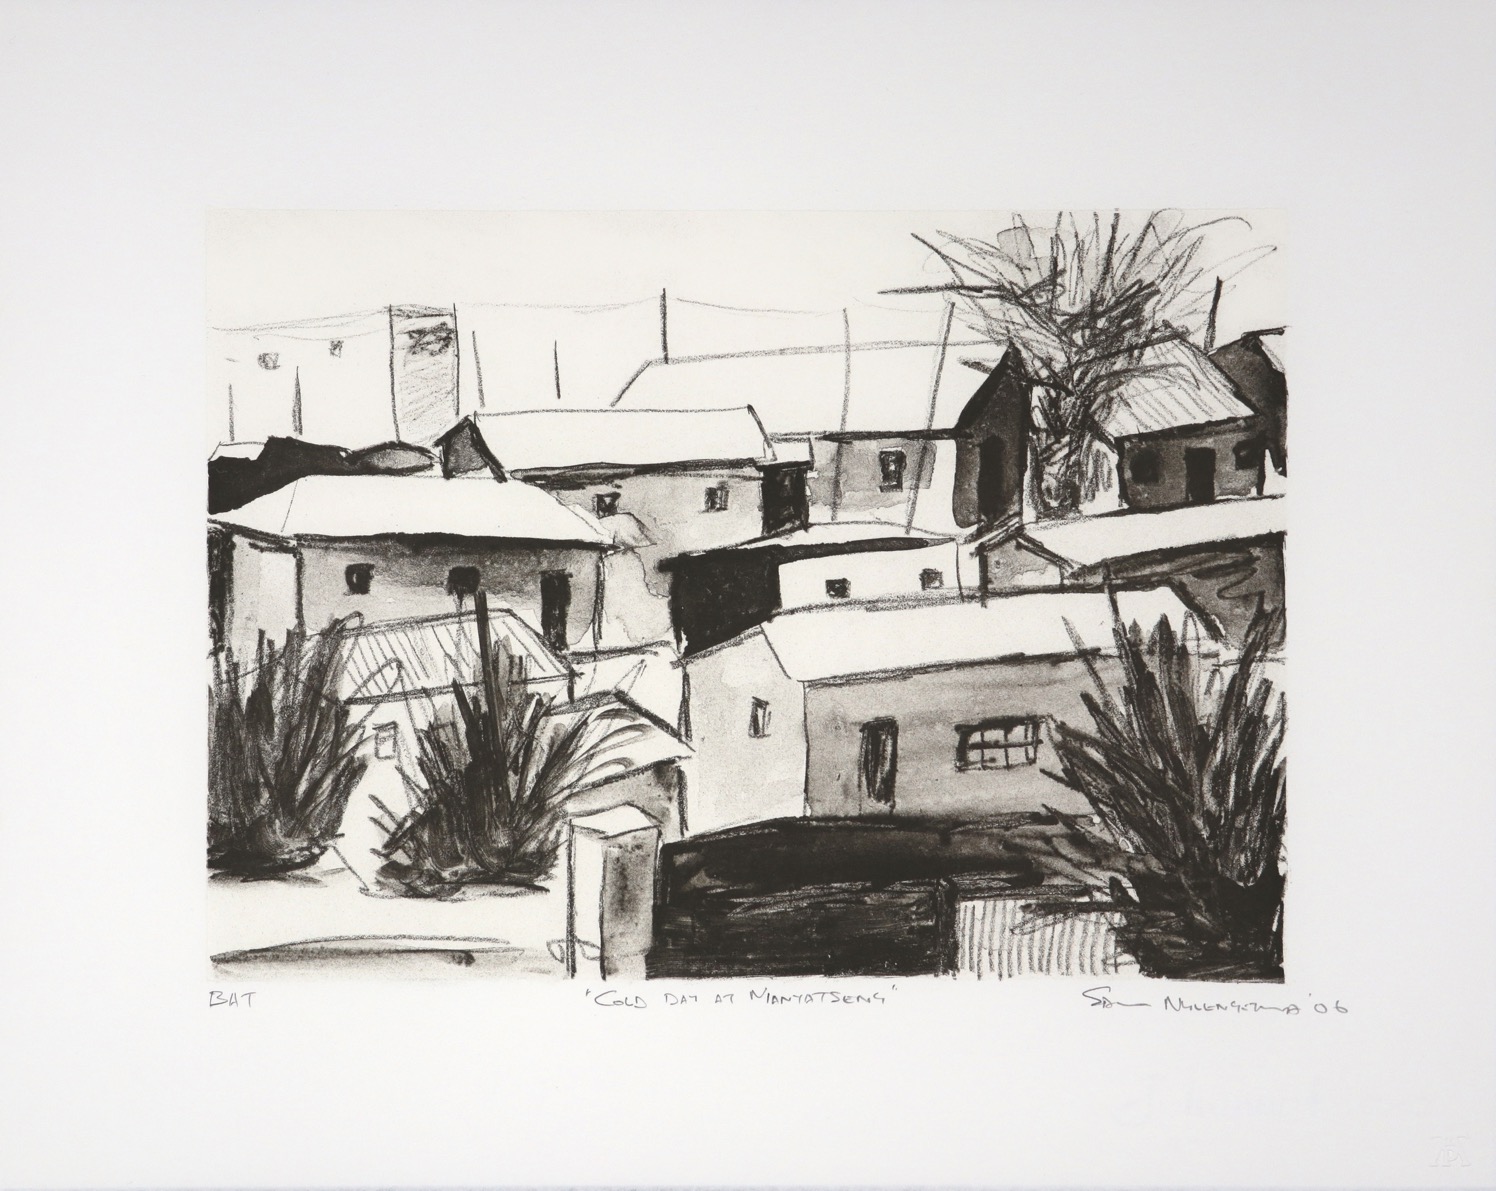 Monochrome lithograph print of tightly clustered South African township homes